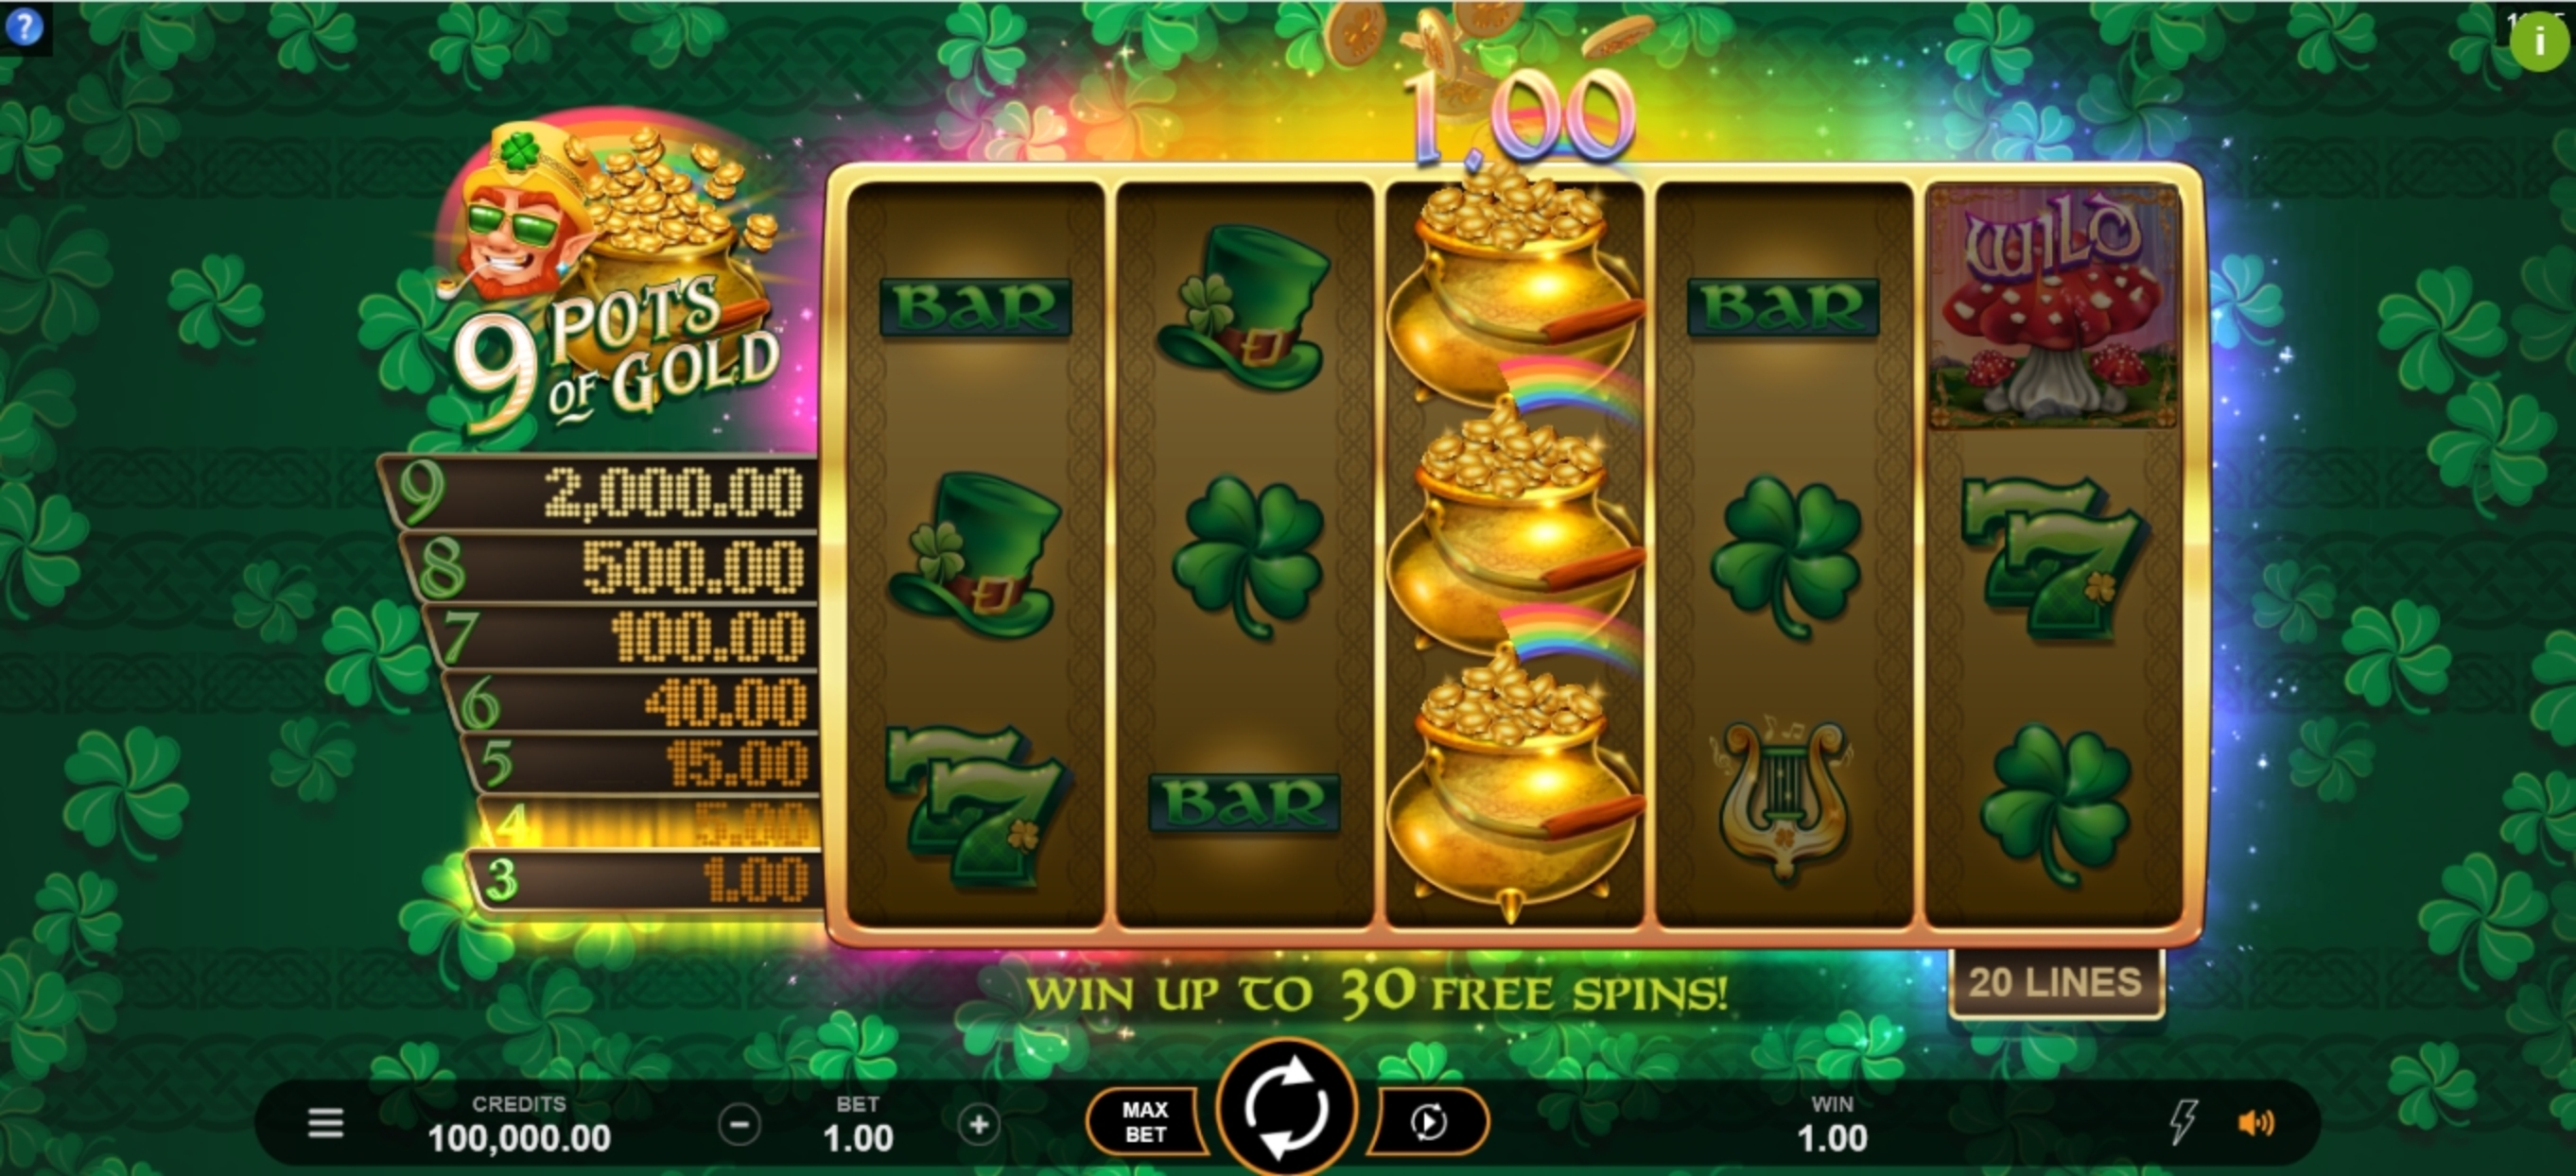 Win Money in 9 Pots of Gold Free Slot Game by Gameburger Studios